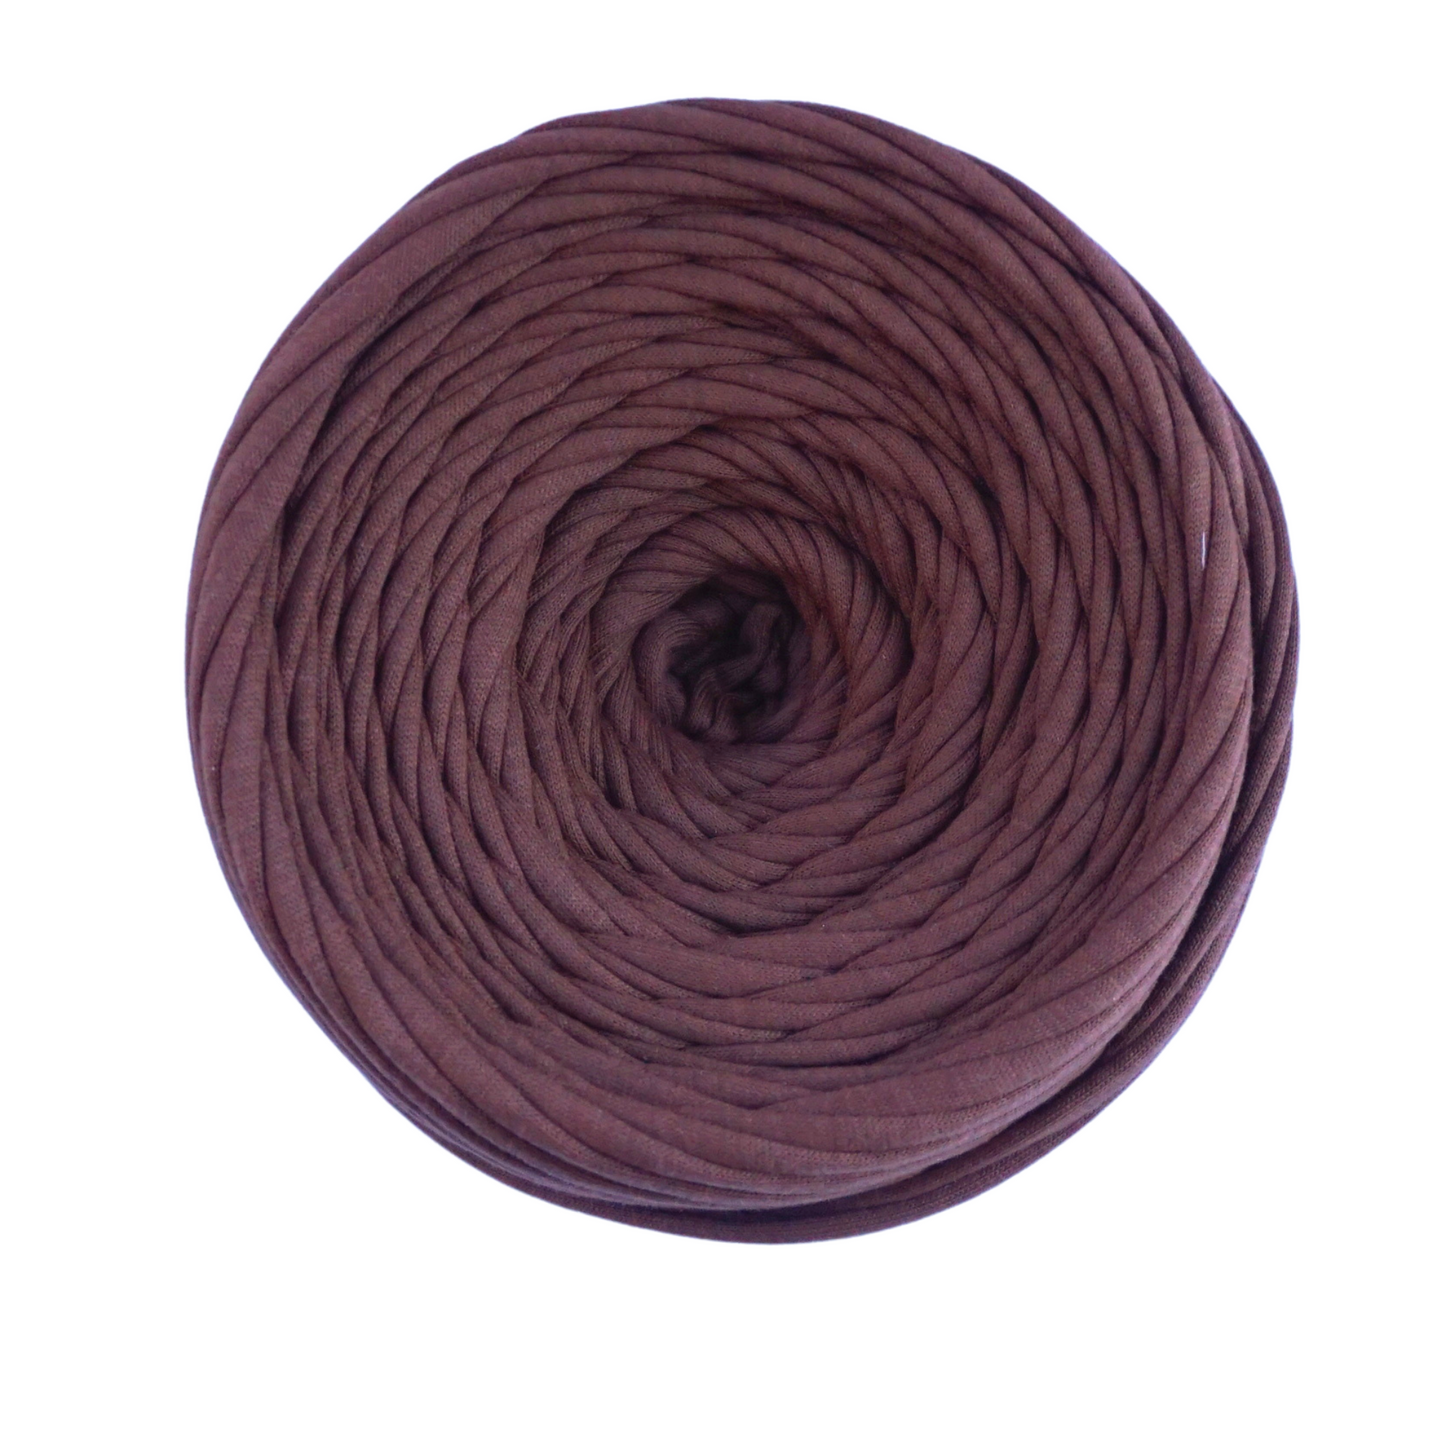 T-shirt yarn for crocheting baskets, bags, rugs and home decor.  Nut